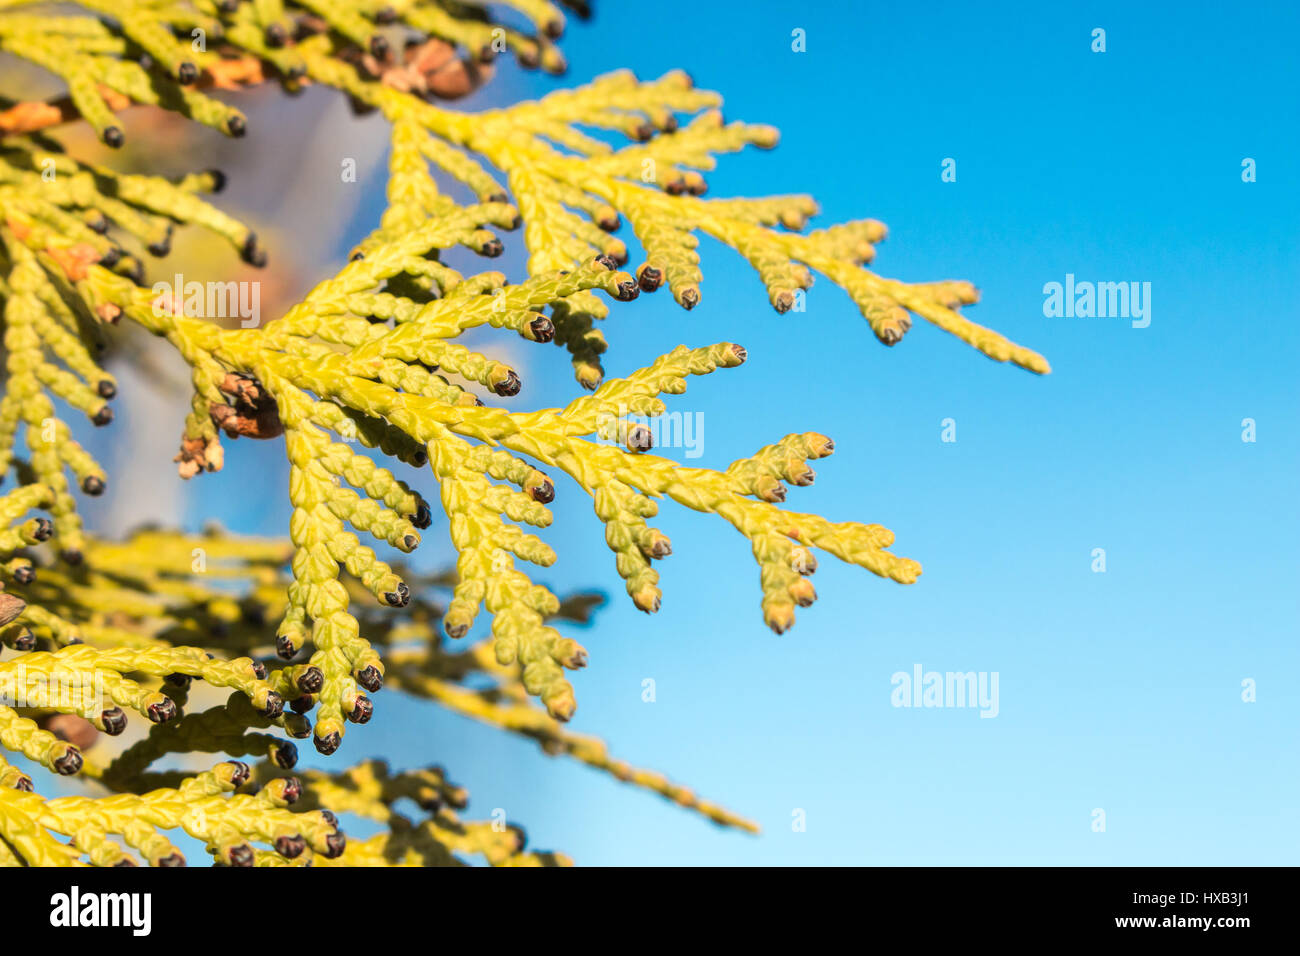 Branch of Thuya with buds in spring closeup against a background of bright blue sky. Stock Photo